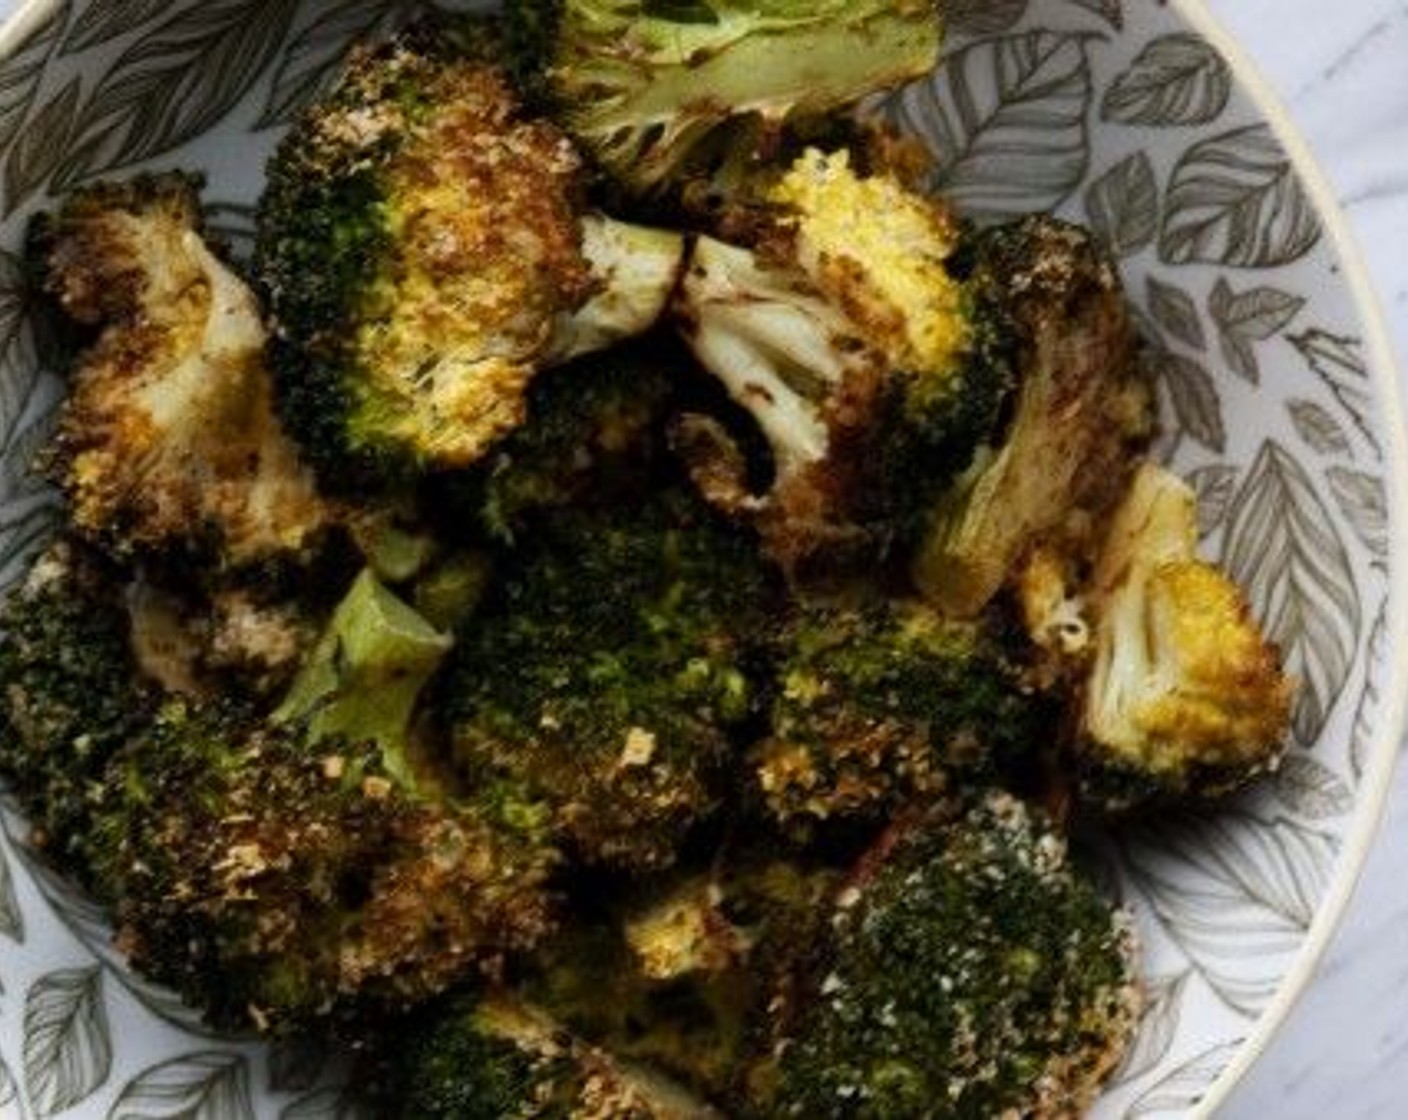 step 4 Bake in preheated oven 25 to 30 minutes, or until broccoli is golden-brown and crispy.